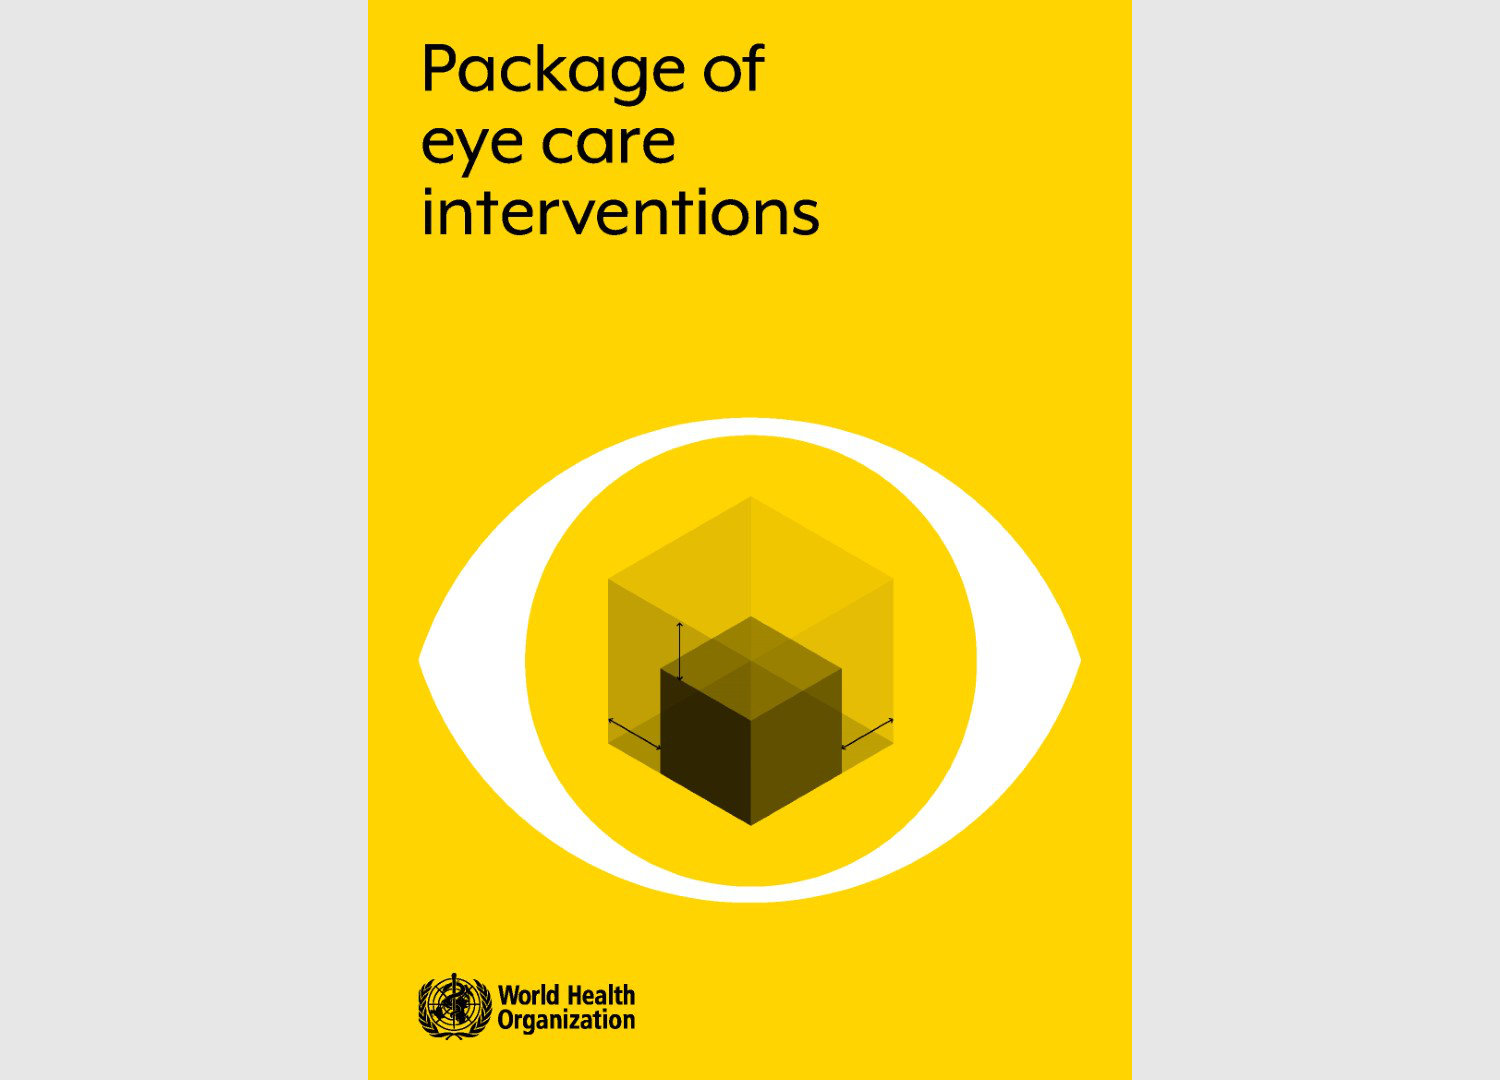 Package of eye care interventions cover